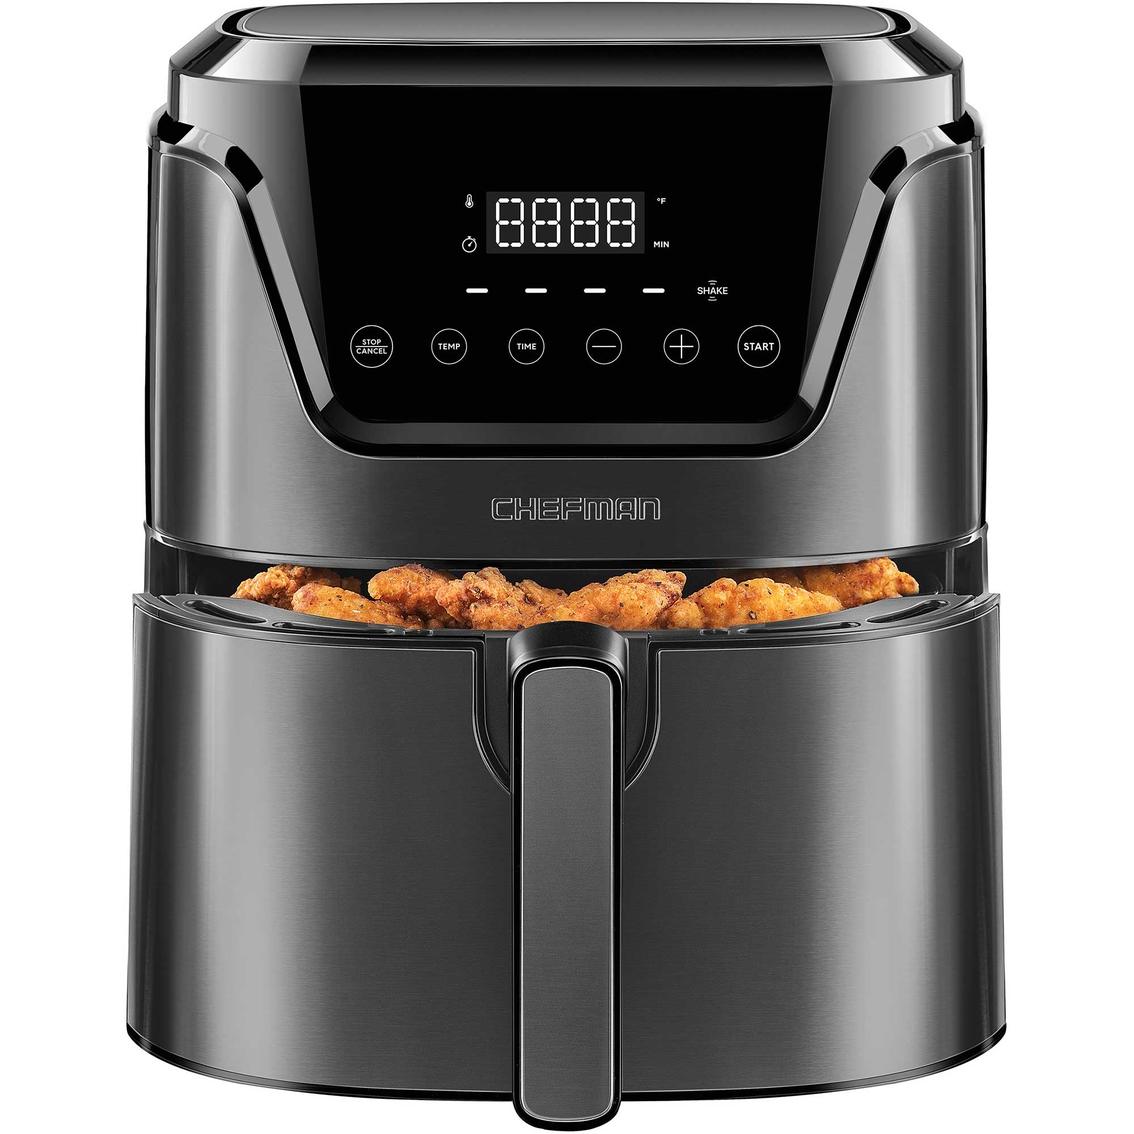 Chefman 4.5 qt. Turbo-Fry Touch Digital Air Fryer - Image 2 of 2